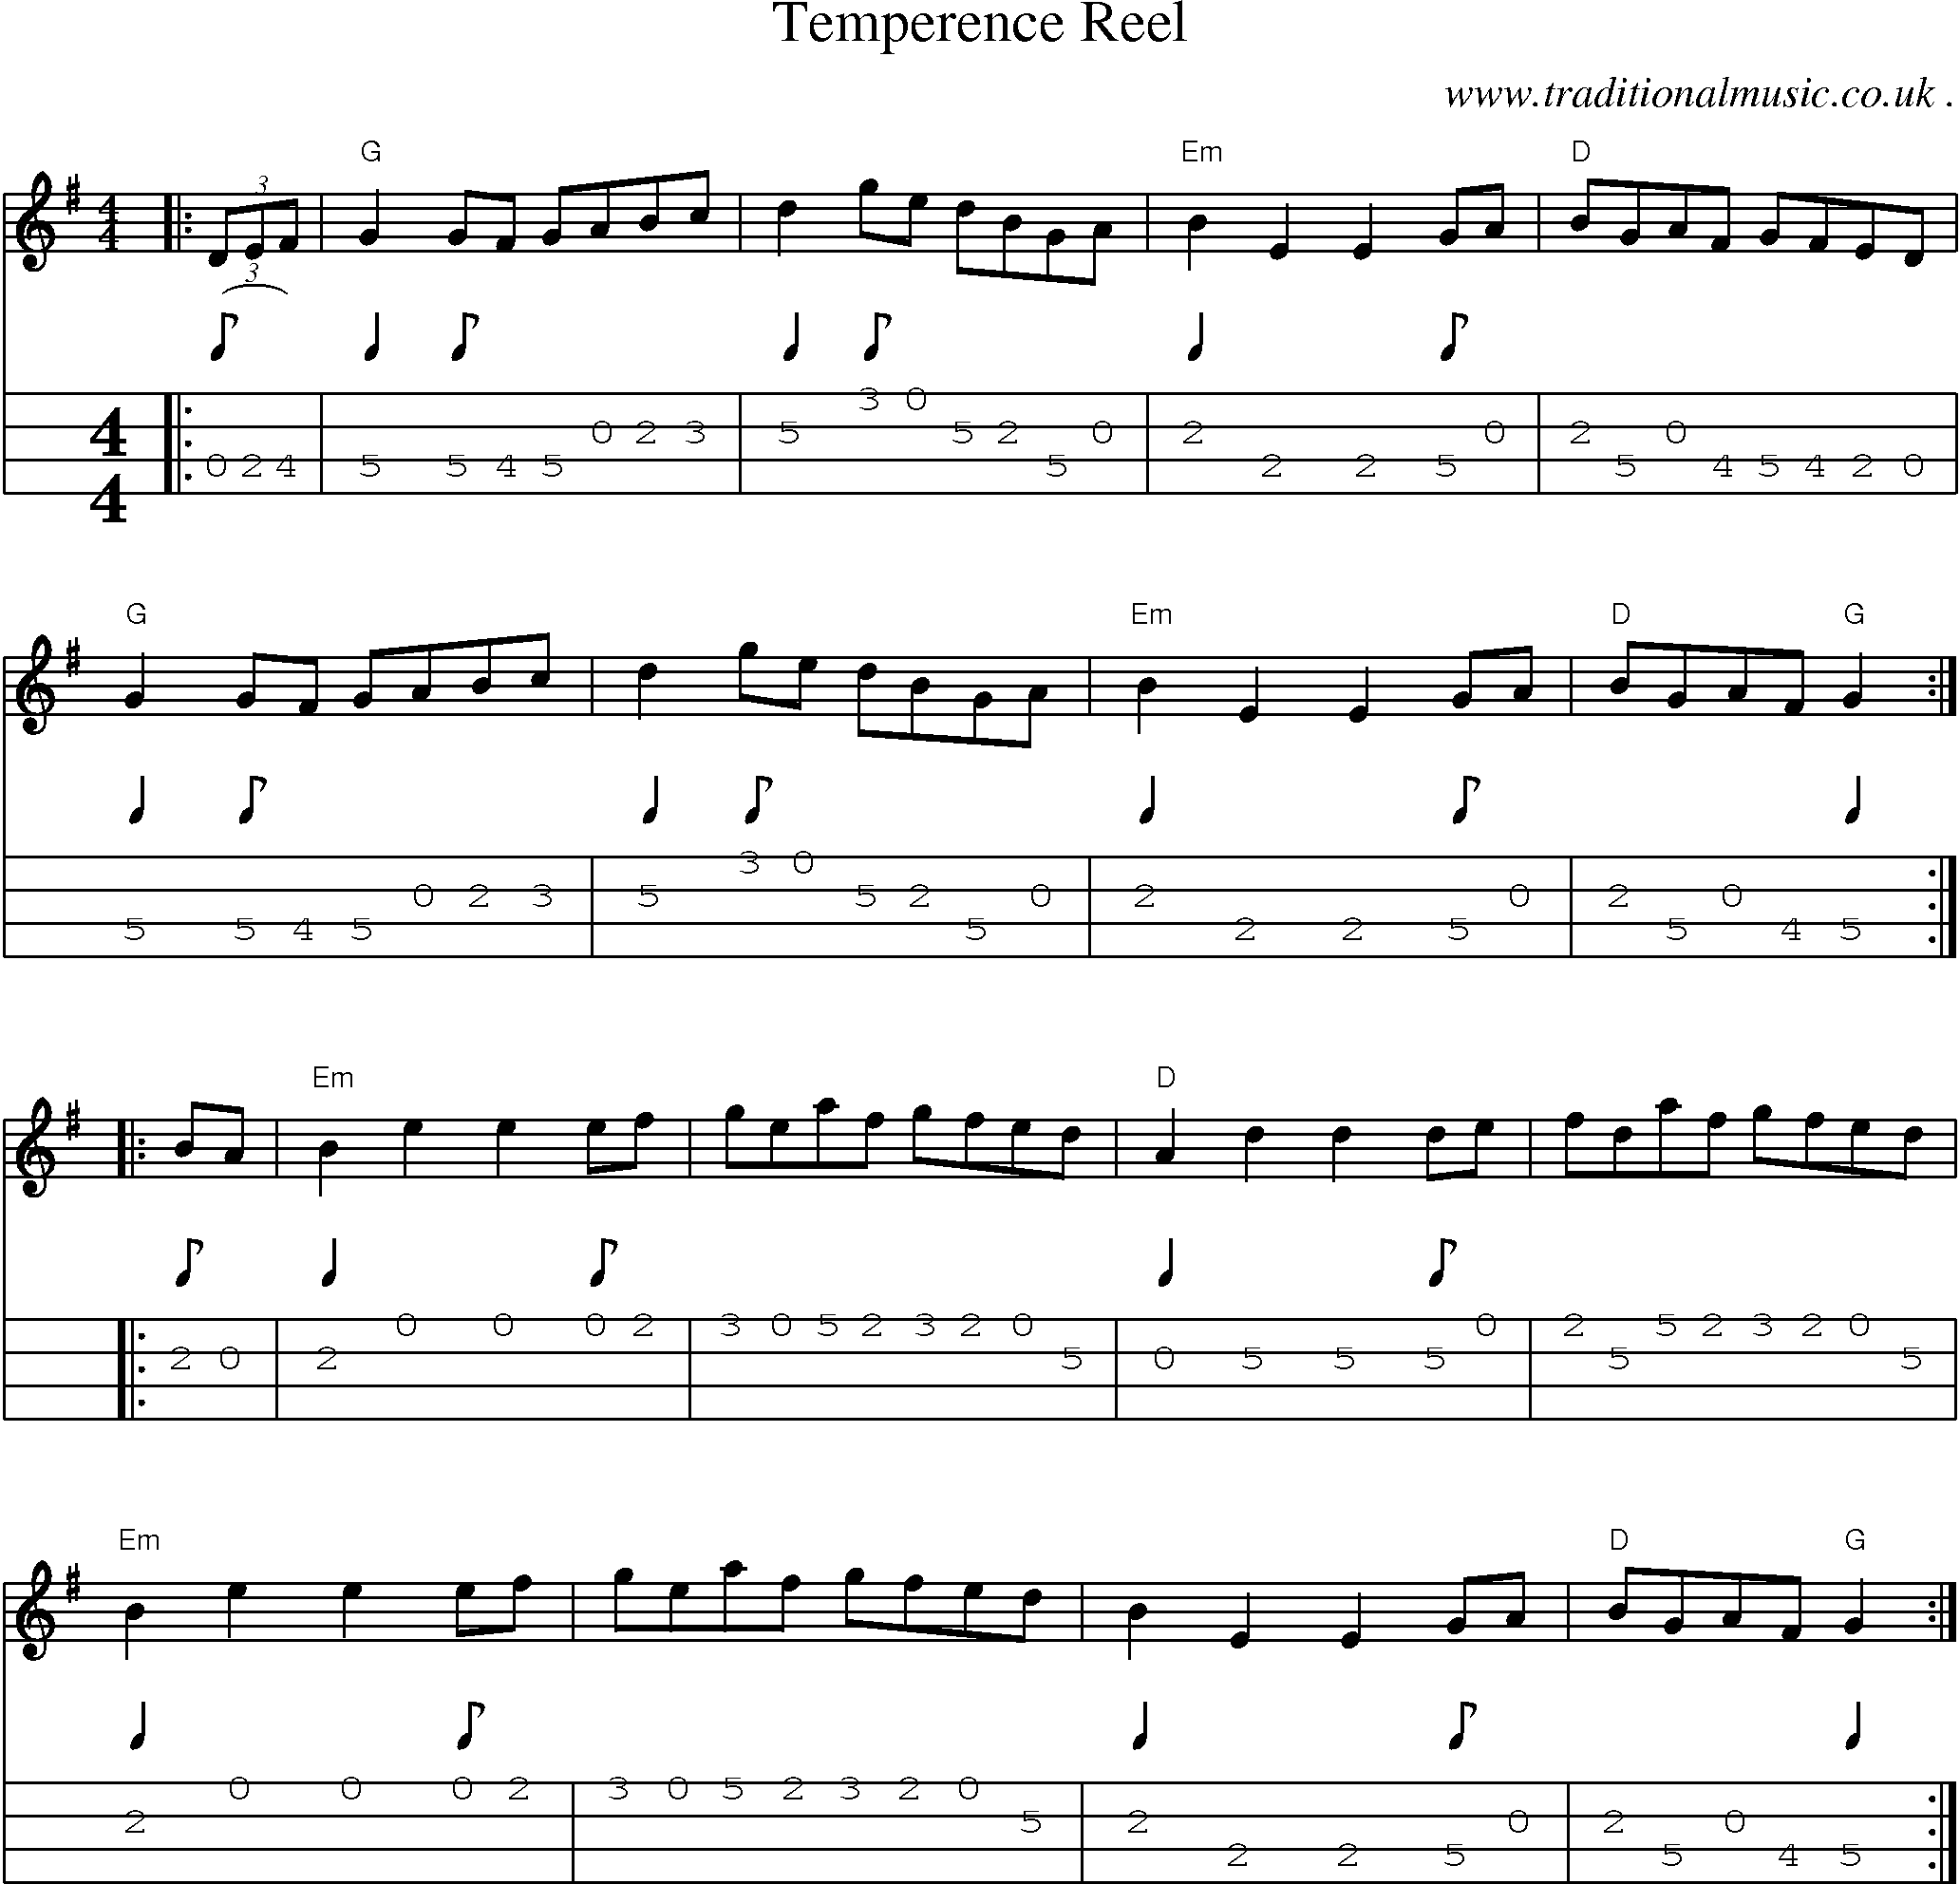 Music Score and Guitar Tabs for Temperence Reel